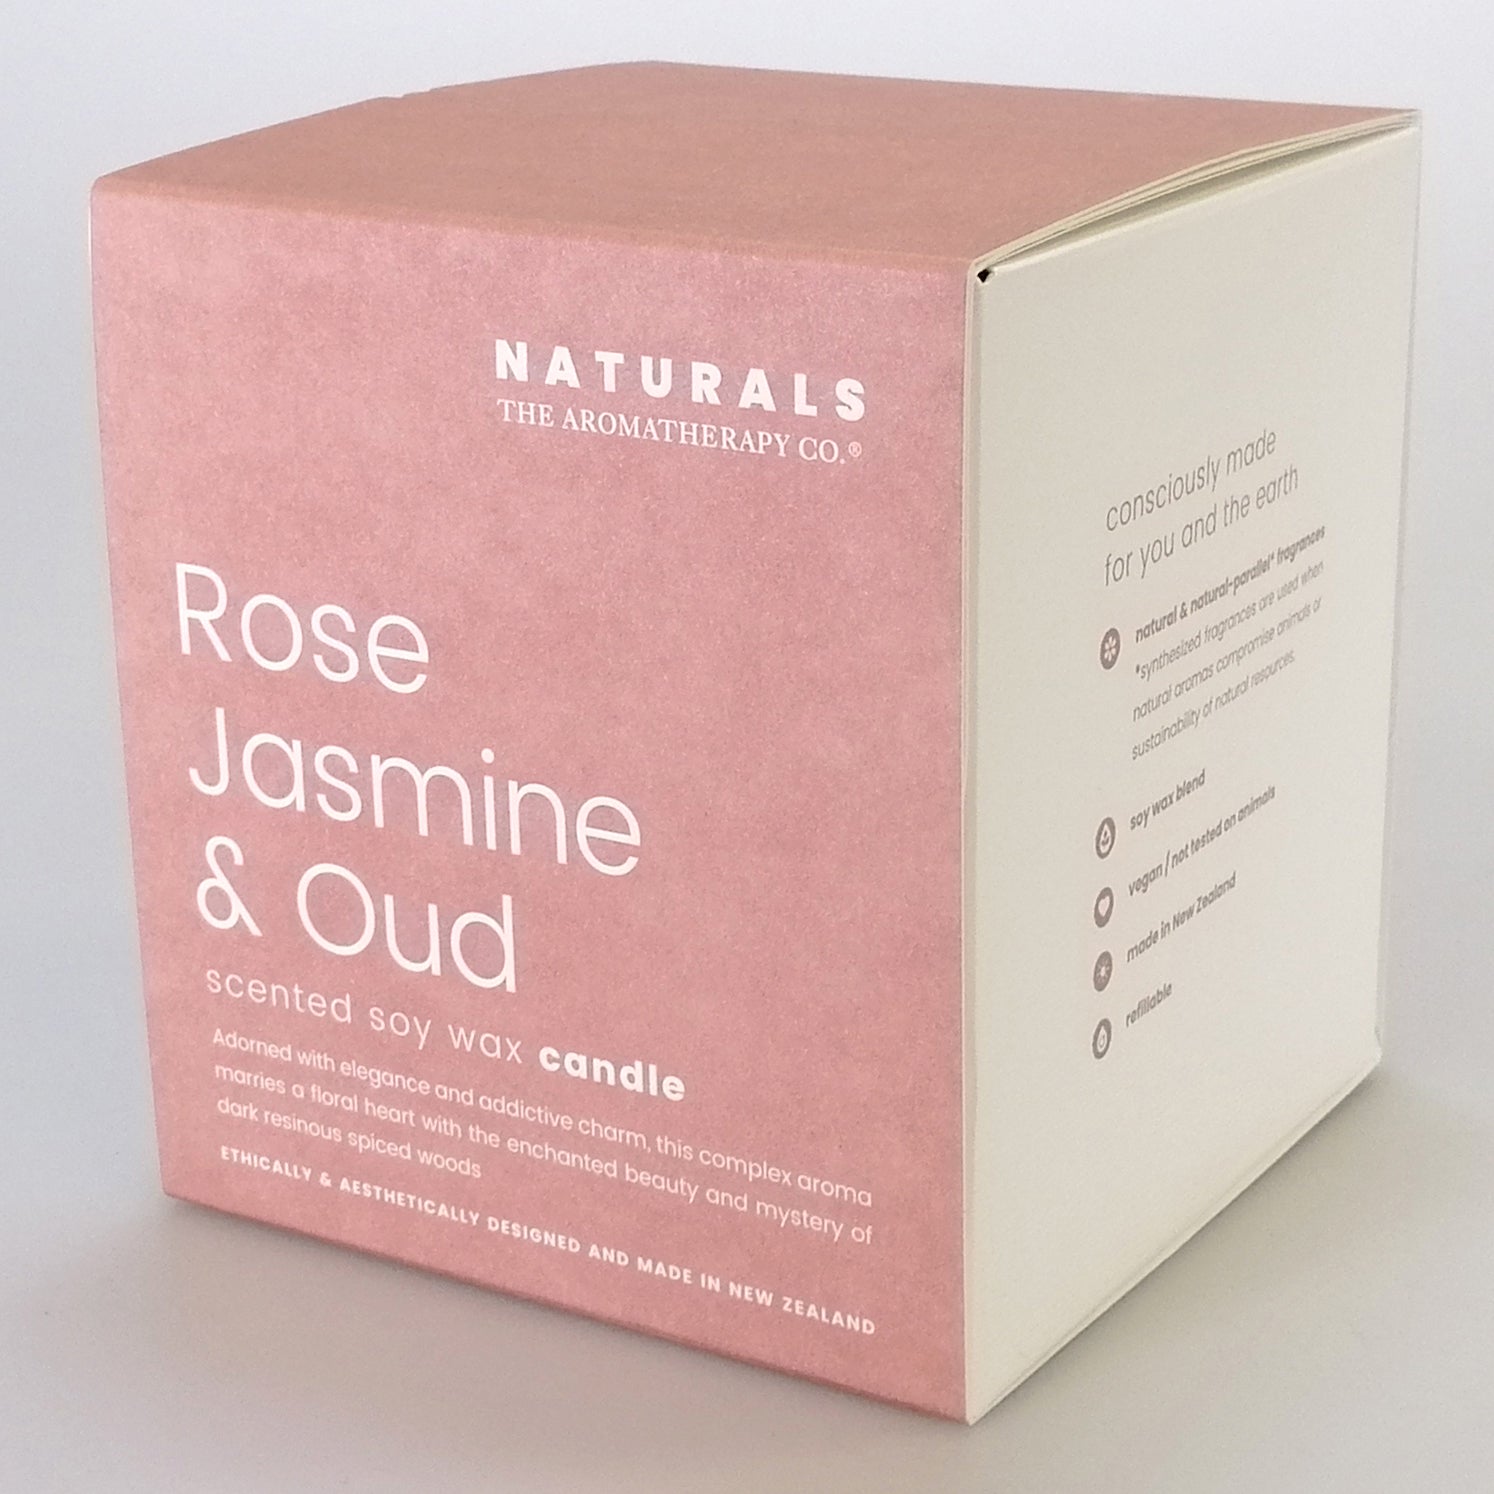 The Aromatherapy Co. Naturals - Rose Jasmine & Oud Soy Wax Candle